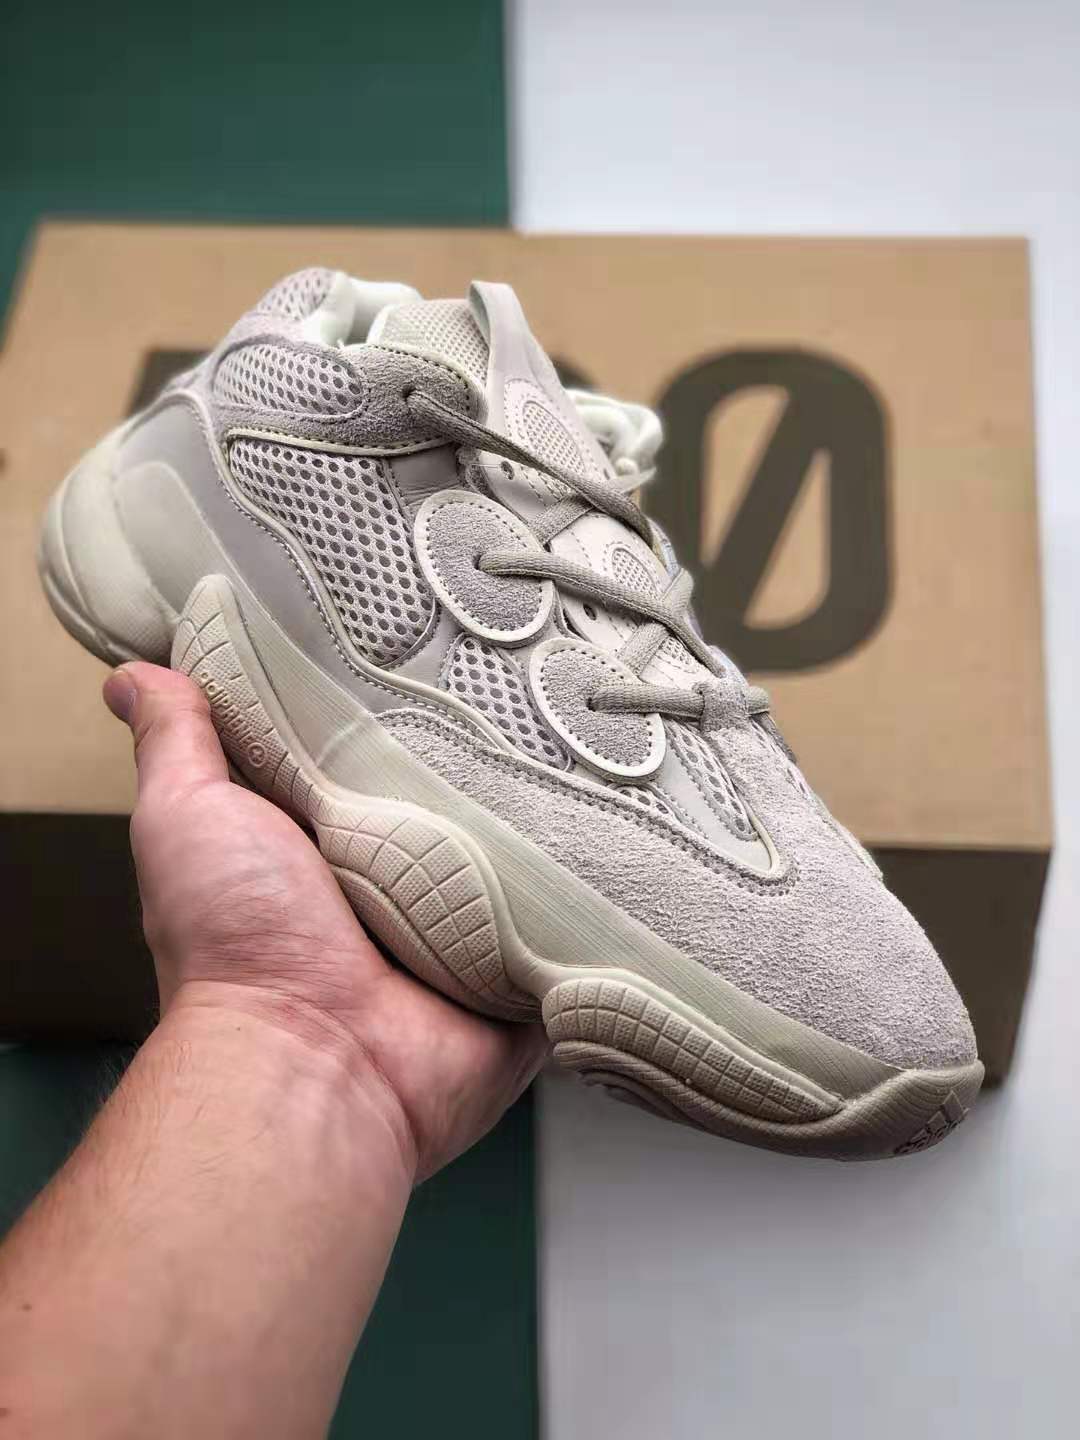 Adidas Yeezy 500 'Blush' DB2908 - Shop the Trendy Sneakers Now!